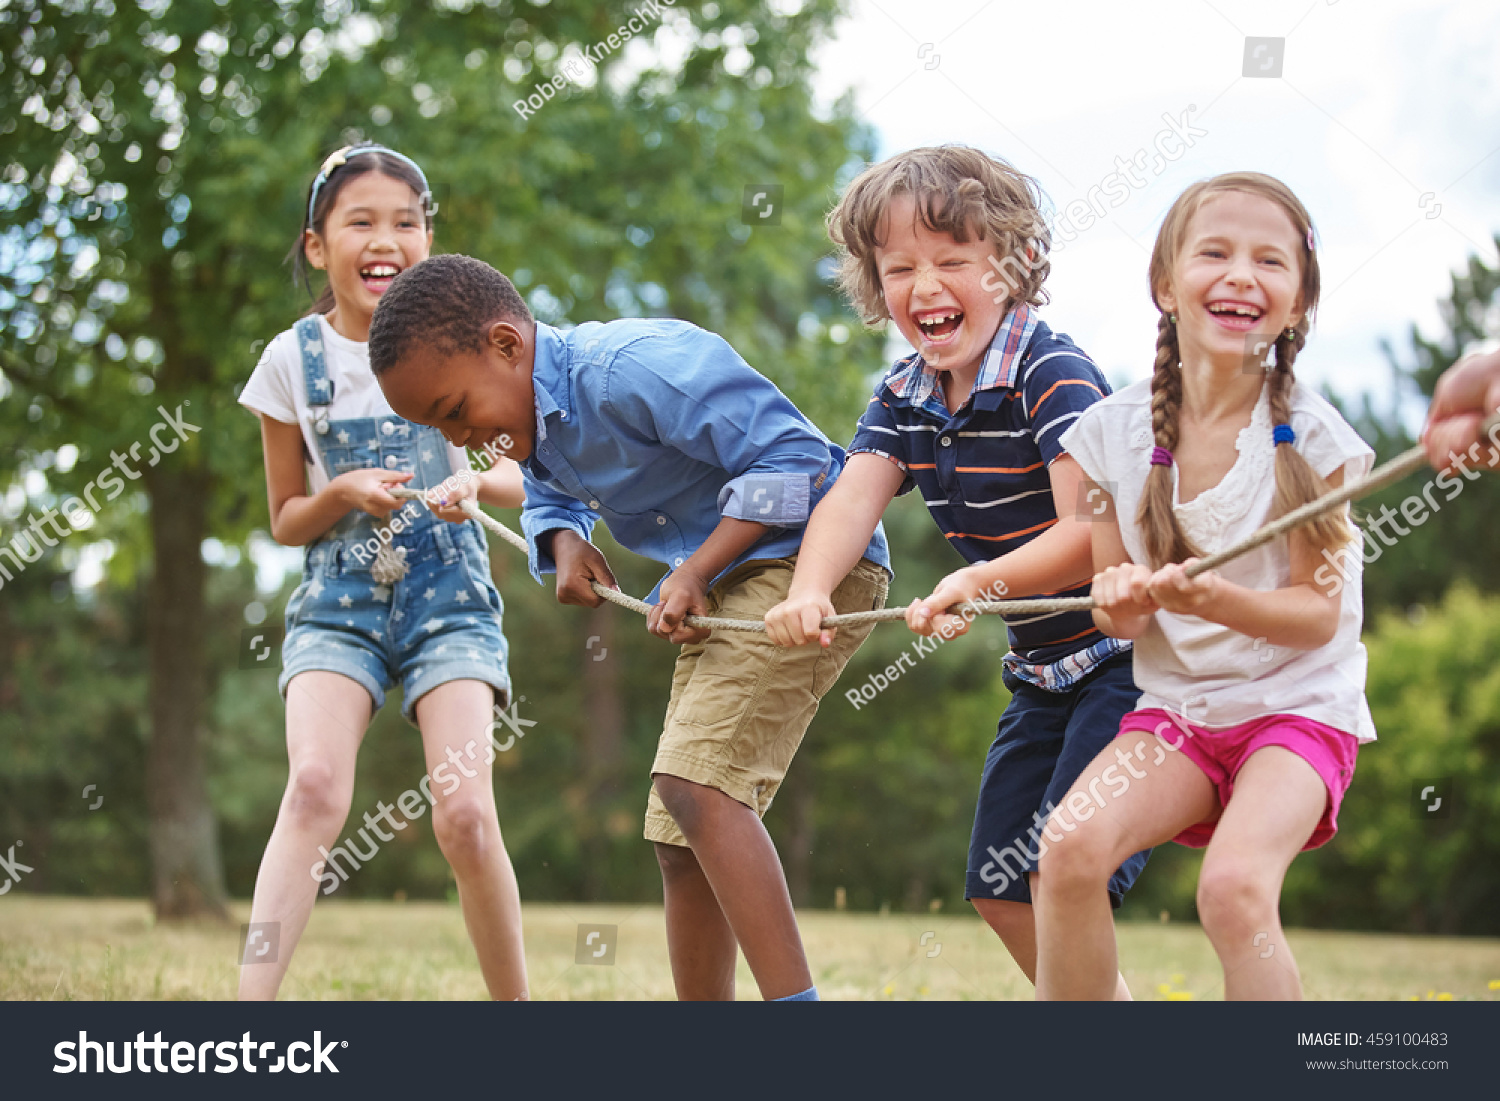 Children playing tug of war at the park #459100483